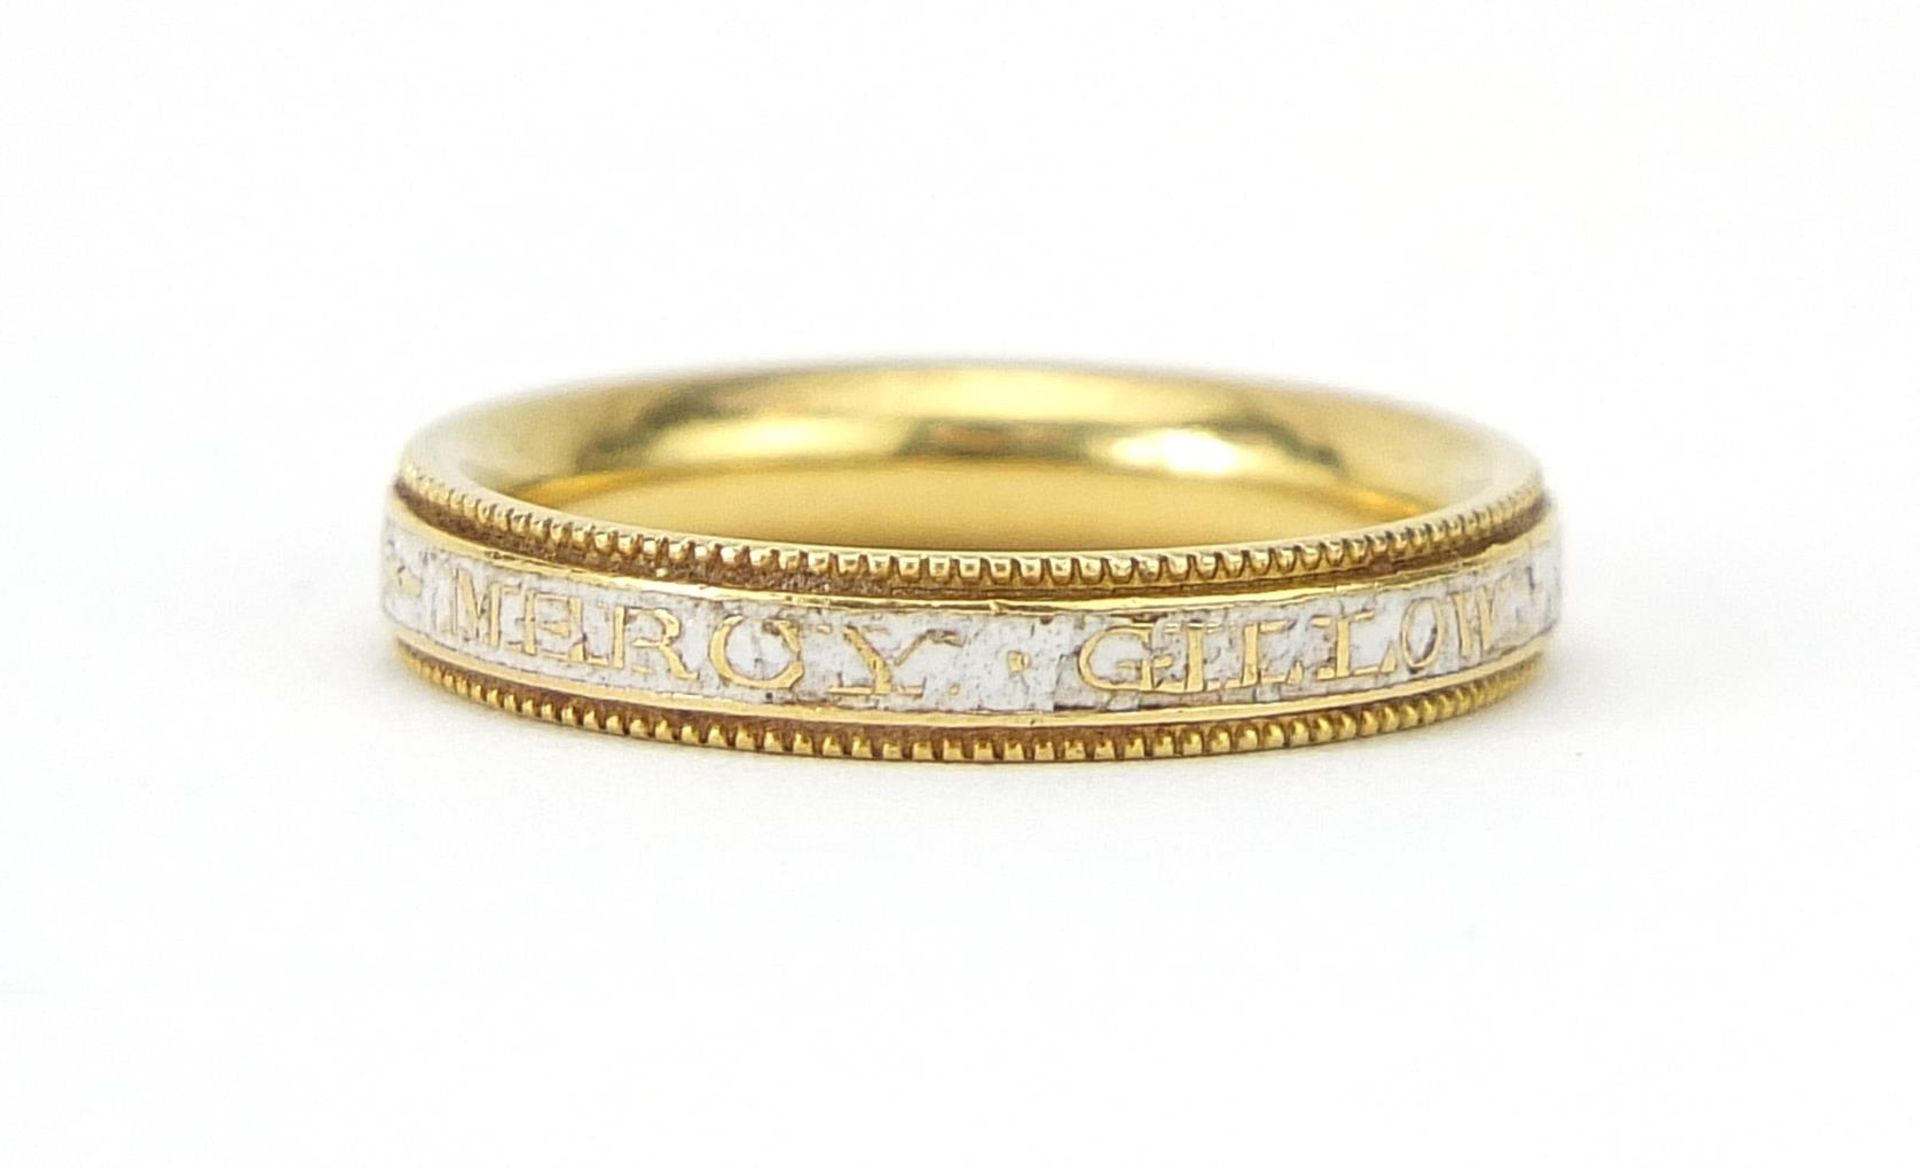 Antique 15ct gold white enamel mourning ring for Mercy Gillow, probably relating to furniture makers